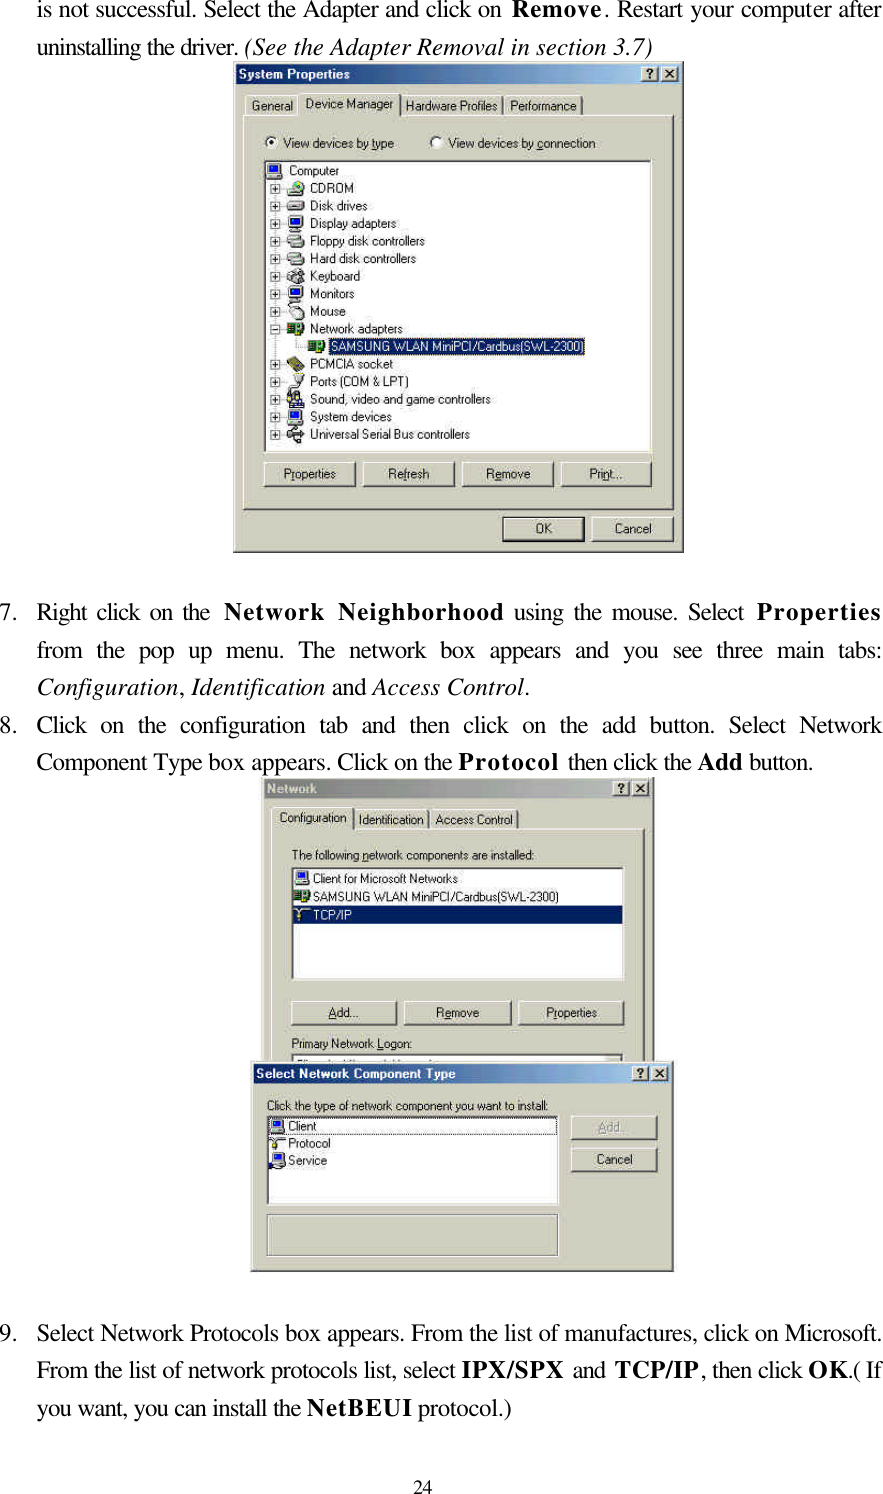  24is not successful. Select the Adapter and click on Remove. Restart your computer after uninstalling the driver. (See the Adapter Removal in section 3.7)    7.  Right click on the  Network  Neighborhood using the mouse. Select Properties from the pop up menu. The network box appears and you see three main tabs: Configuration, Identification and Access Control. 8.  Click on the configuration tab and then click on the add button. Select Network      Component Type box appears. Click on the Protocol then click the Add button.   9.  Select Network Protocols box appears. From the list of manufactures, click on Microsoft. From the list of network protocols list, select IPX/SPX and TCP/IP, then click OK.( If you want, you can install the NetBEUI protocol.) 